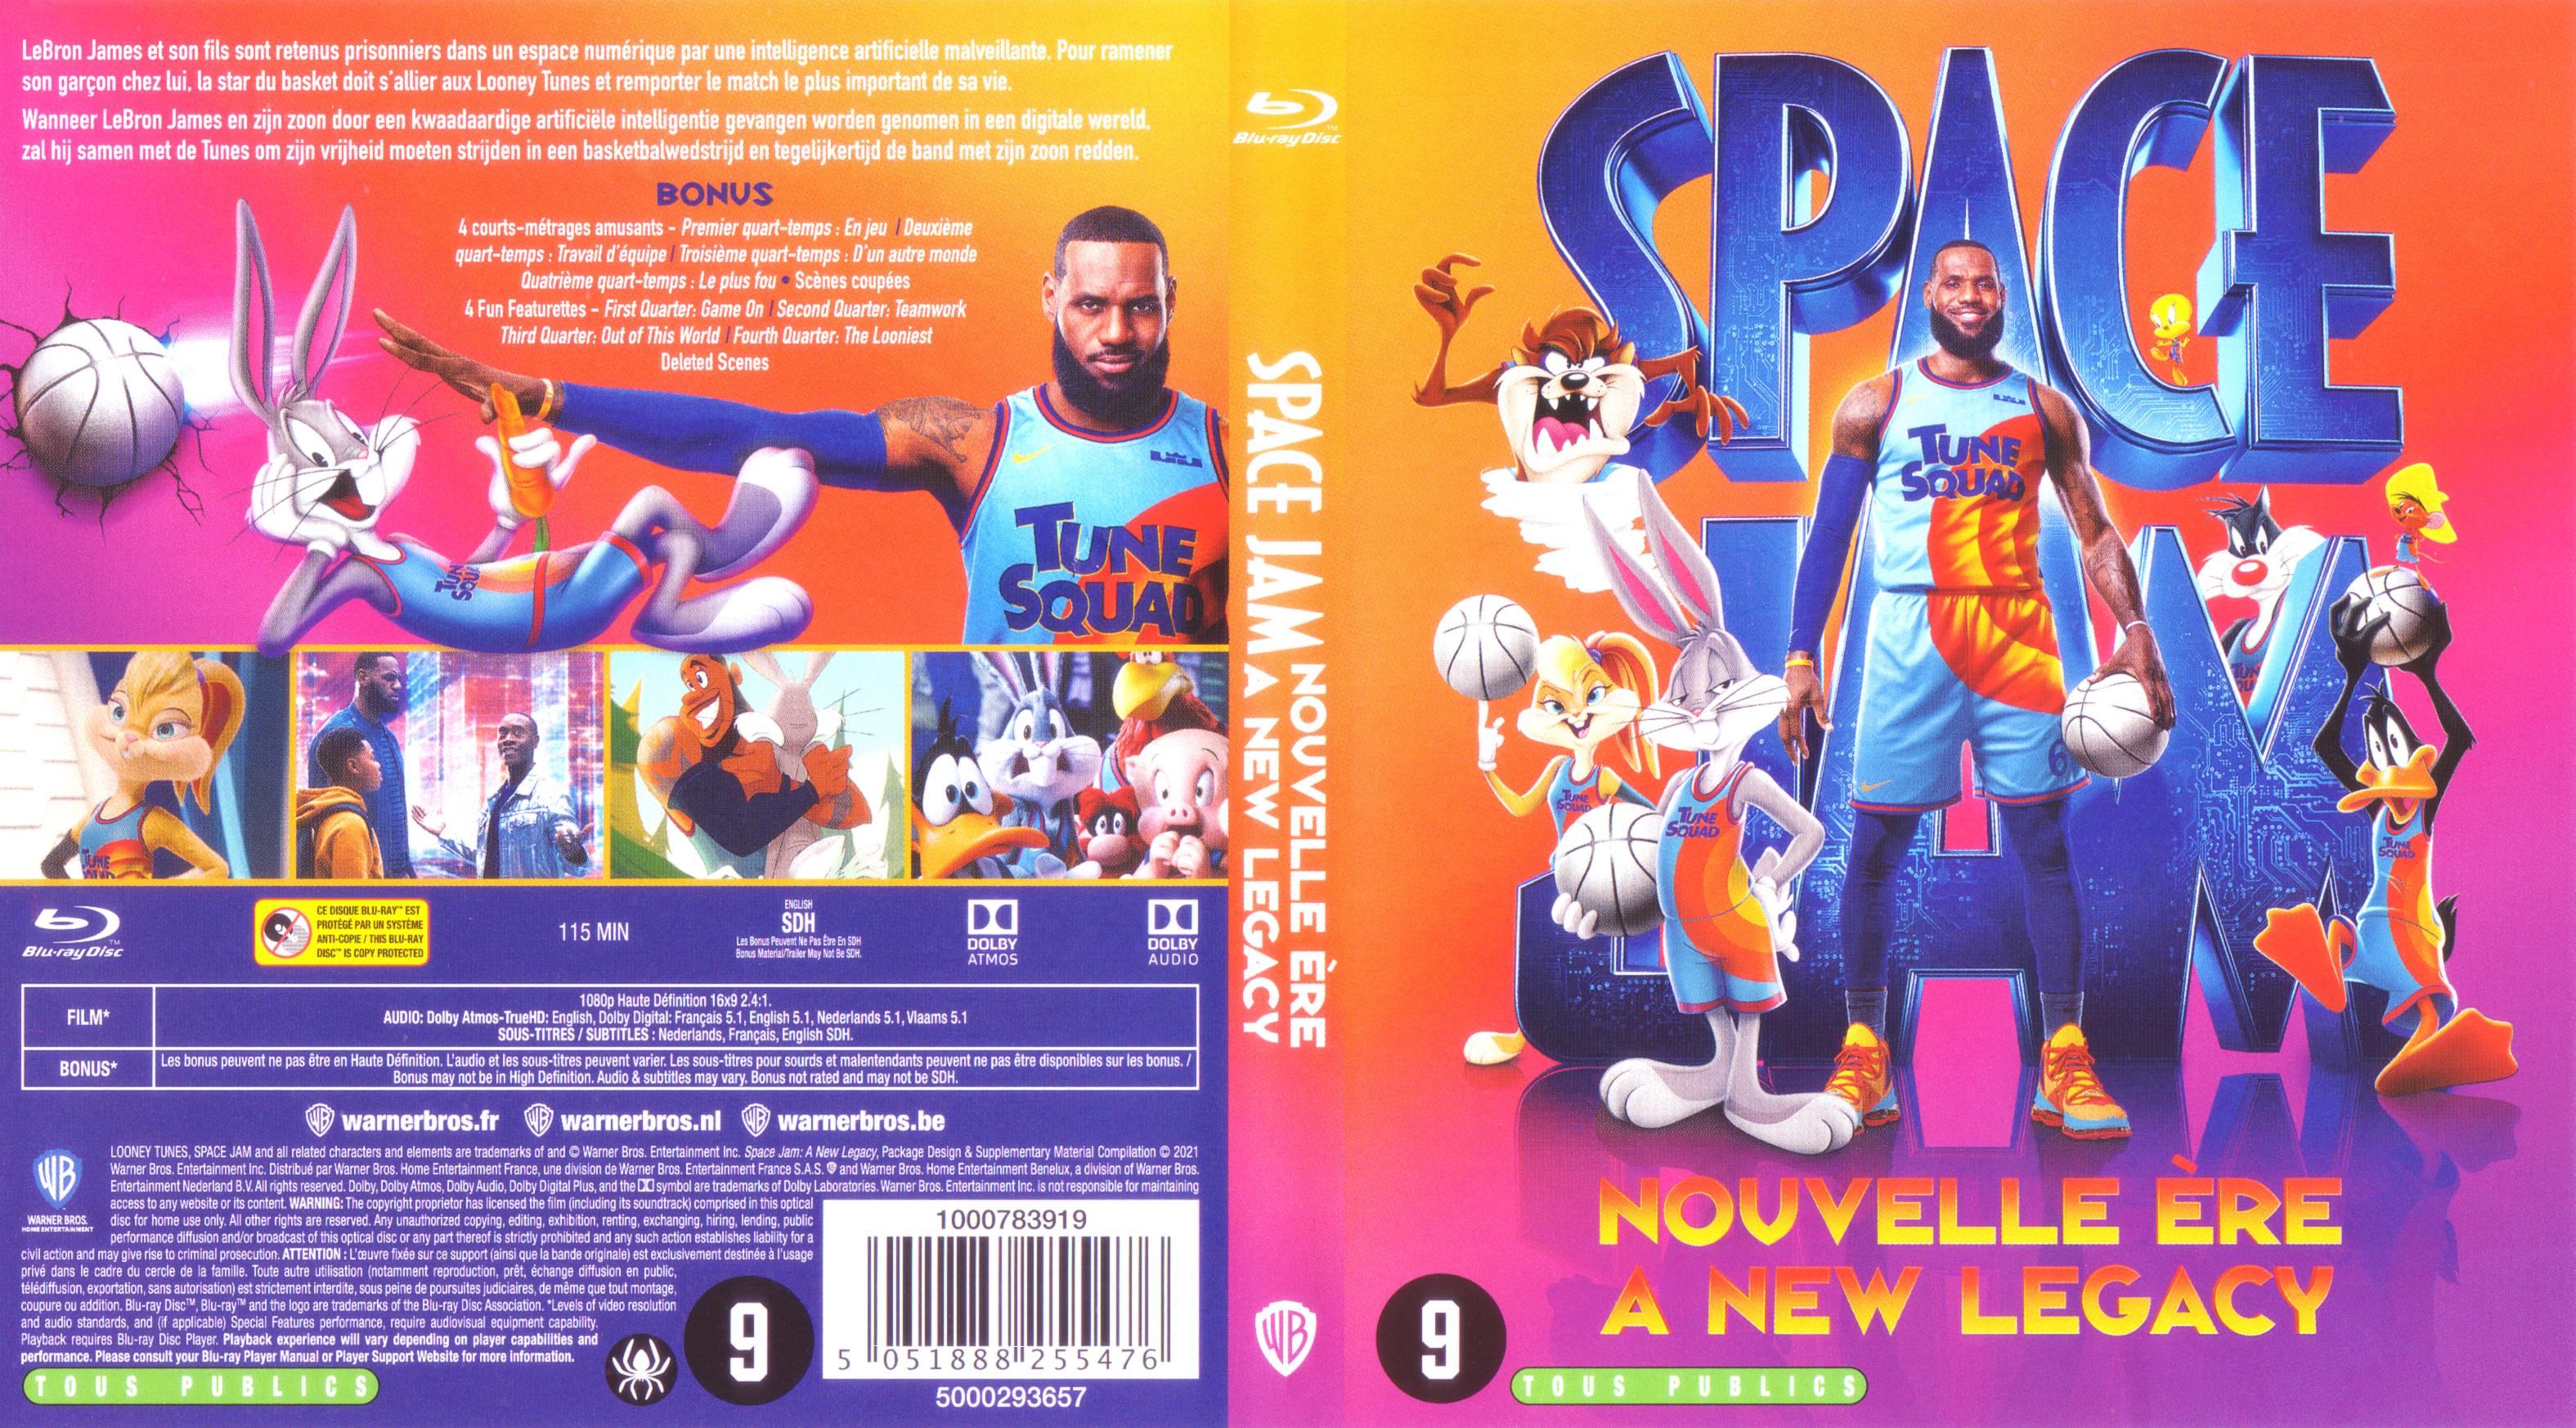 Jaquette DVD Space jam nouvelle re a new legacy (BLU-RAY)